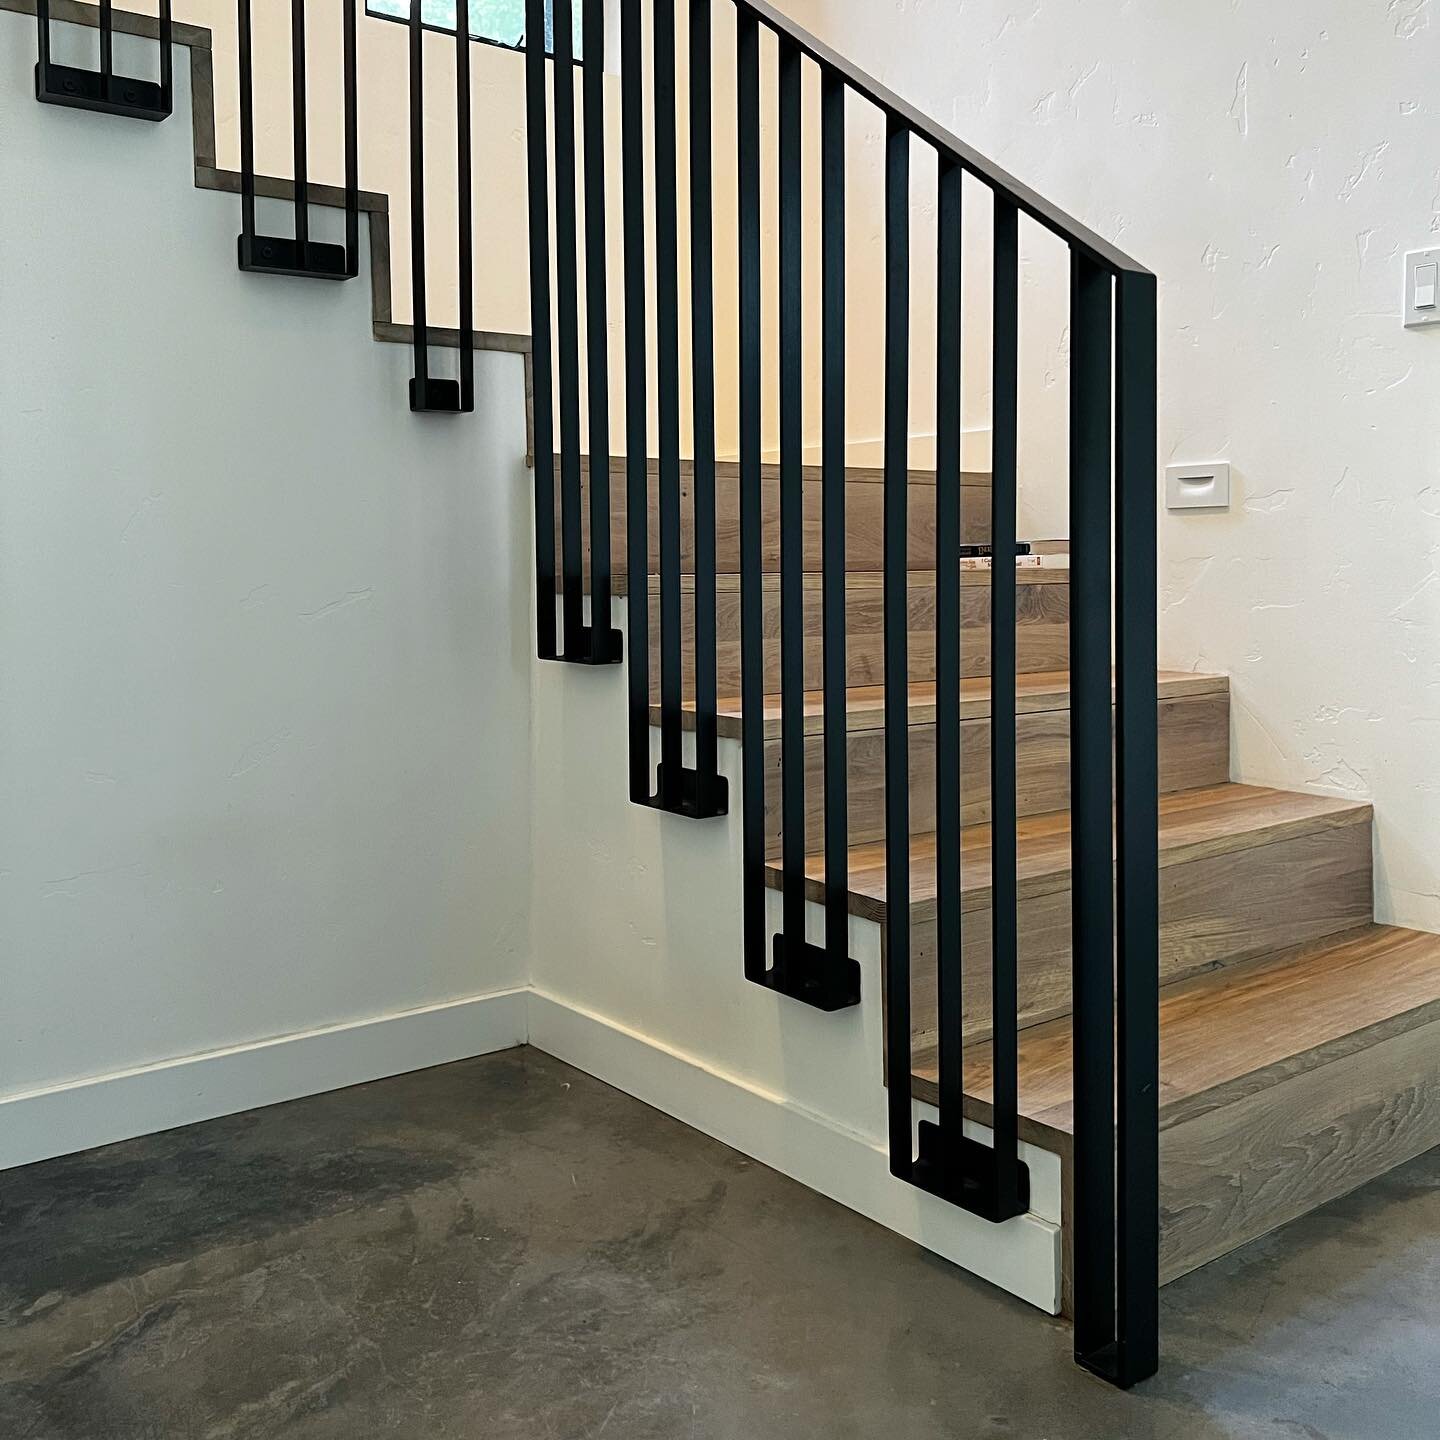 Vertical railing, but make it sexy 😎.

One of our favorite designs to date in the home of some of our favorite people. 🖤

#verticalrailing #metalfabrication #handrails #residentialconstruction #artisanmetalfabrication #architecturalelements #staird